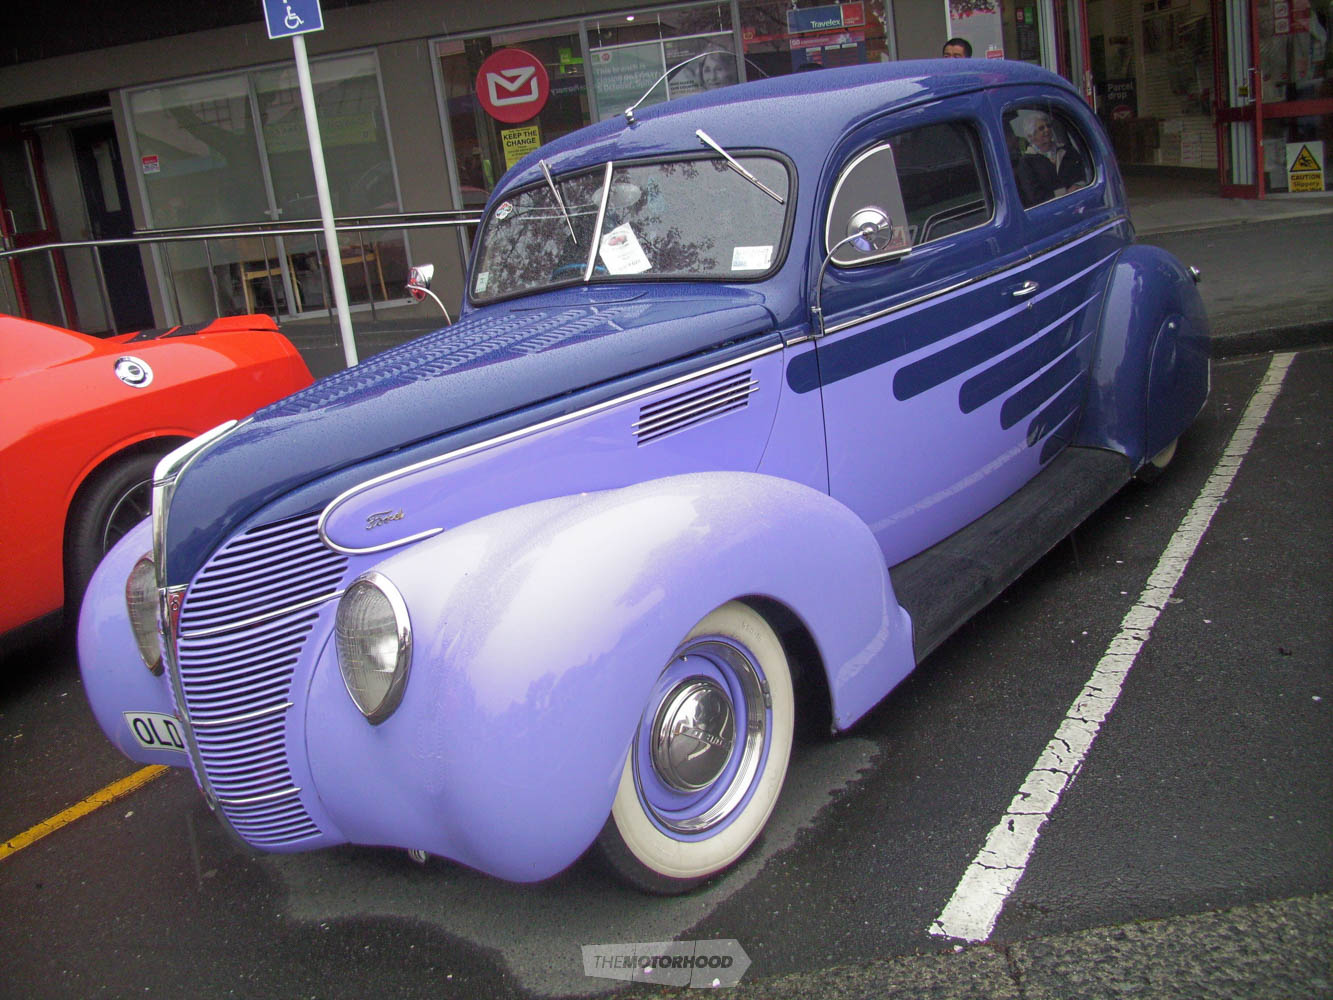 John Julian from Bay Rodders owns this scallped and louvred OLDAZE 1939 Ford Tudor complete with rear  s.jpg